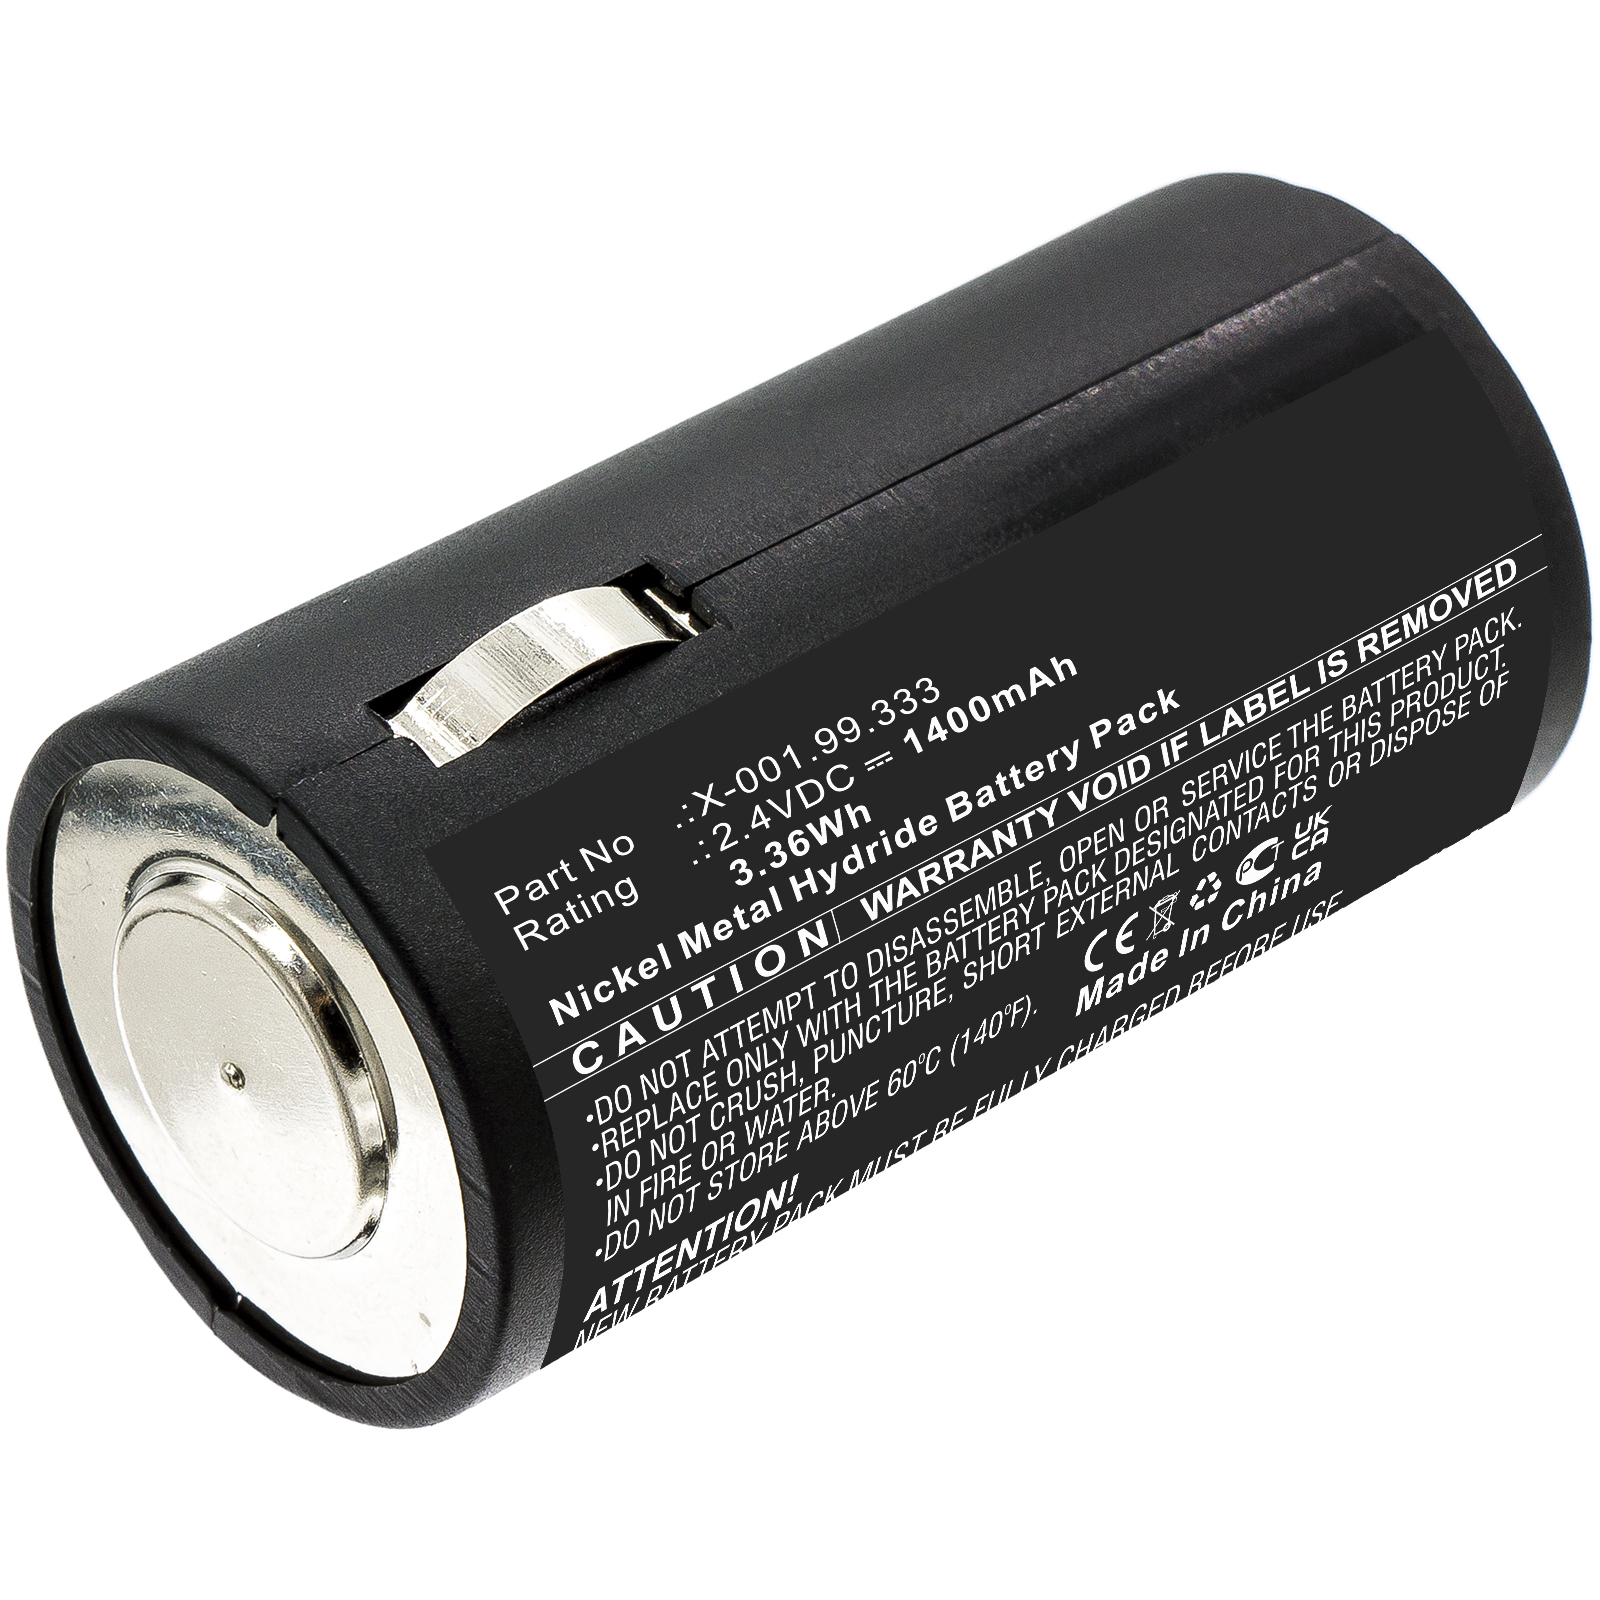 Synergy Digital Medical Battery, Compatible with Heine X-001.99.333 Medical Battery (Ni-MH, 2.4V, 1400mAh)